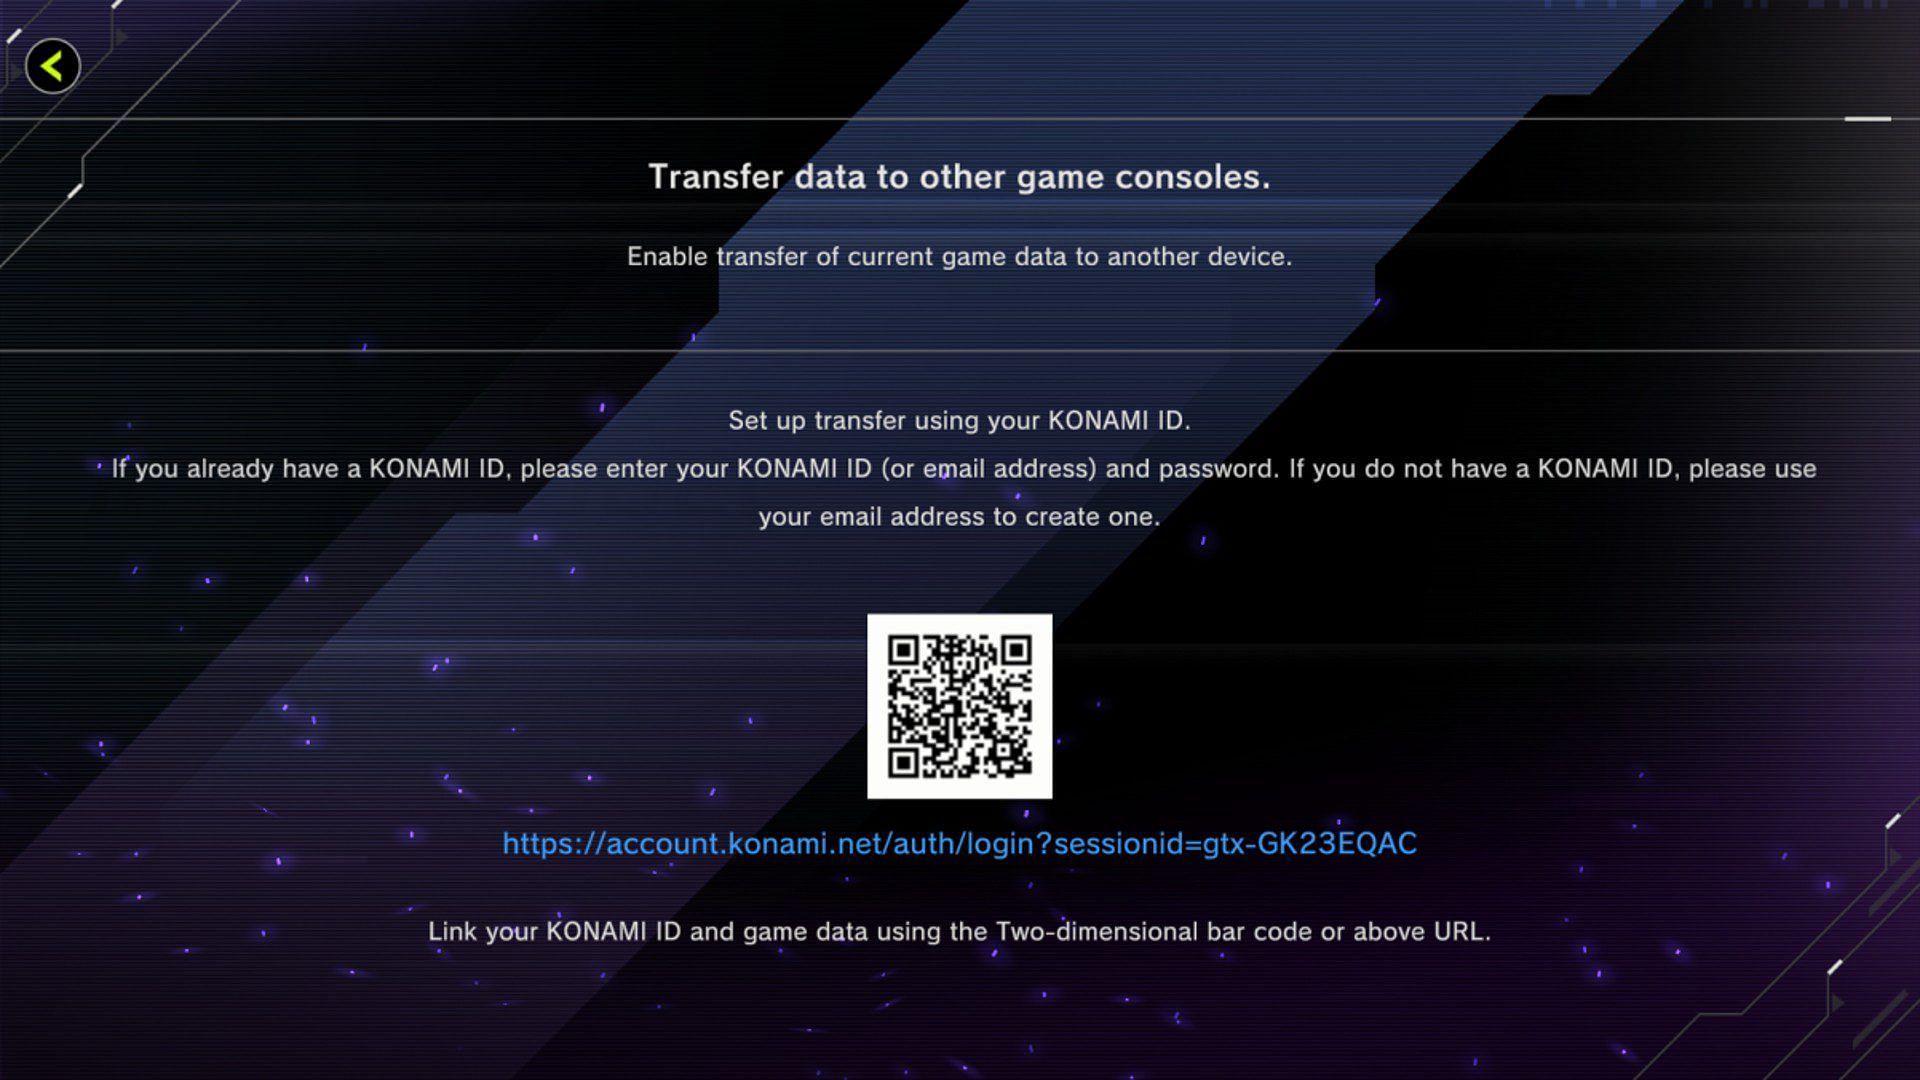 This page allows you to link your data or create a new Konami ID (Image via Konami)